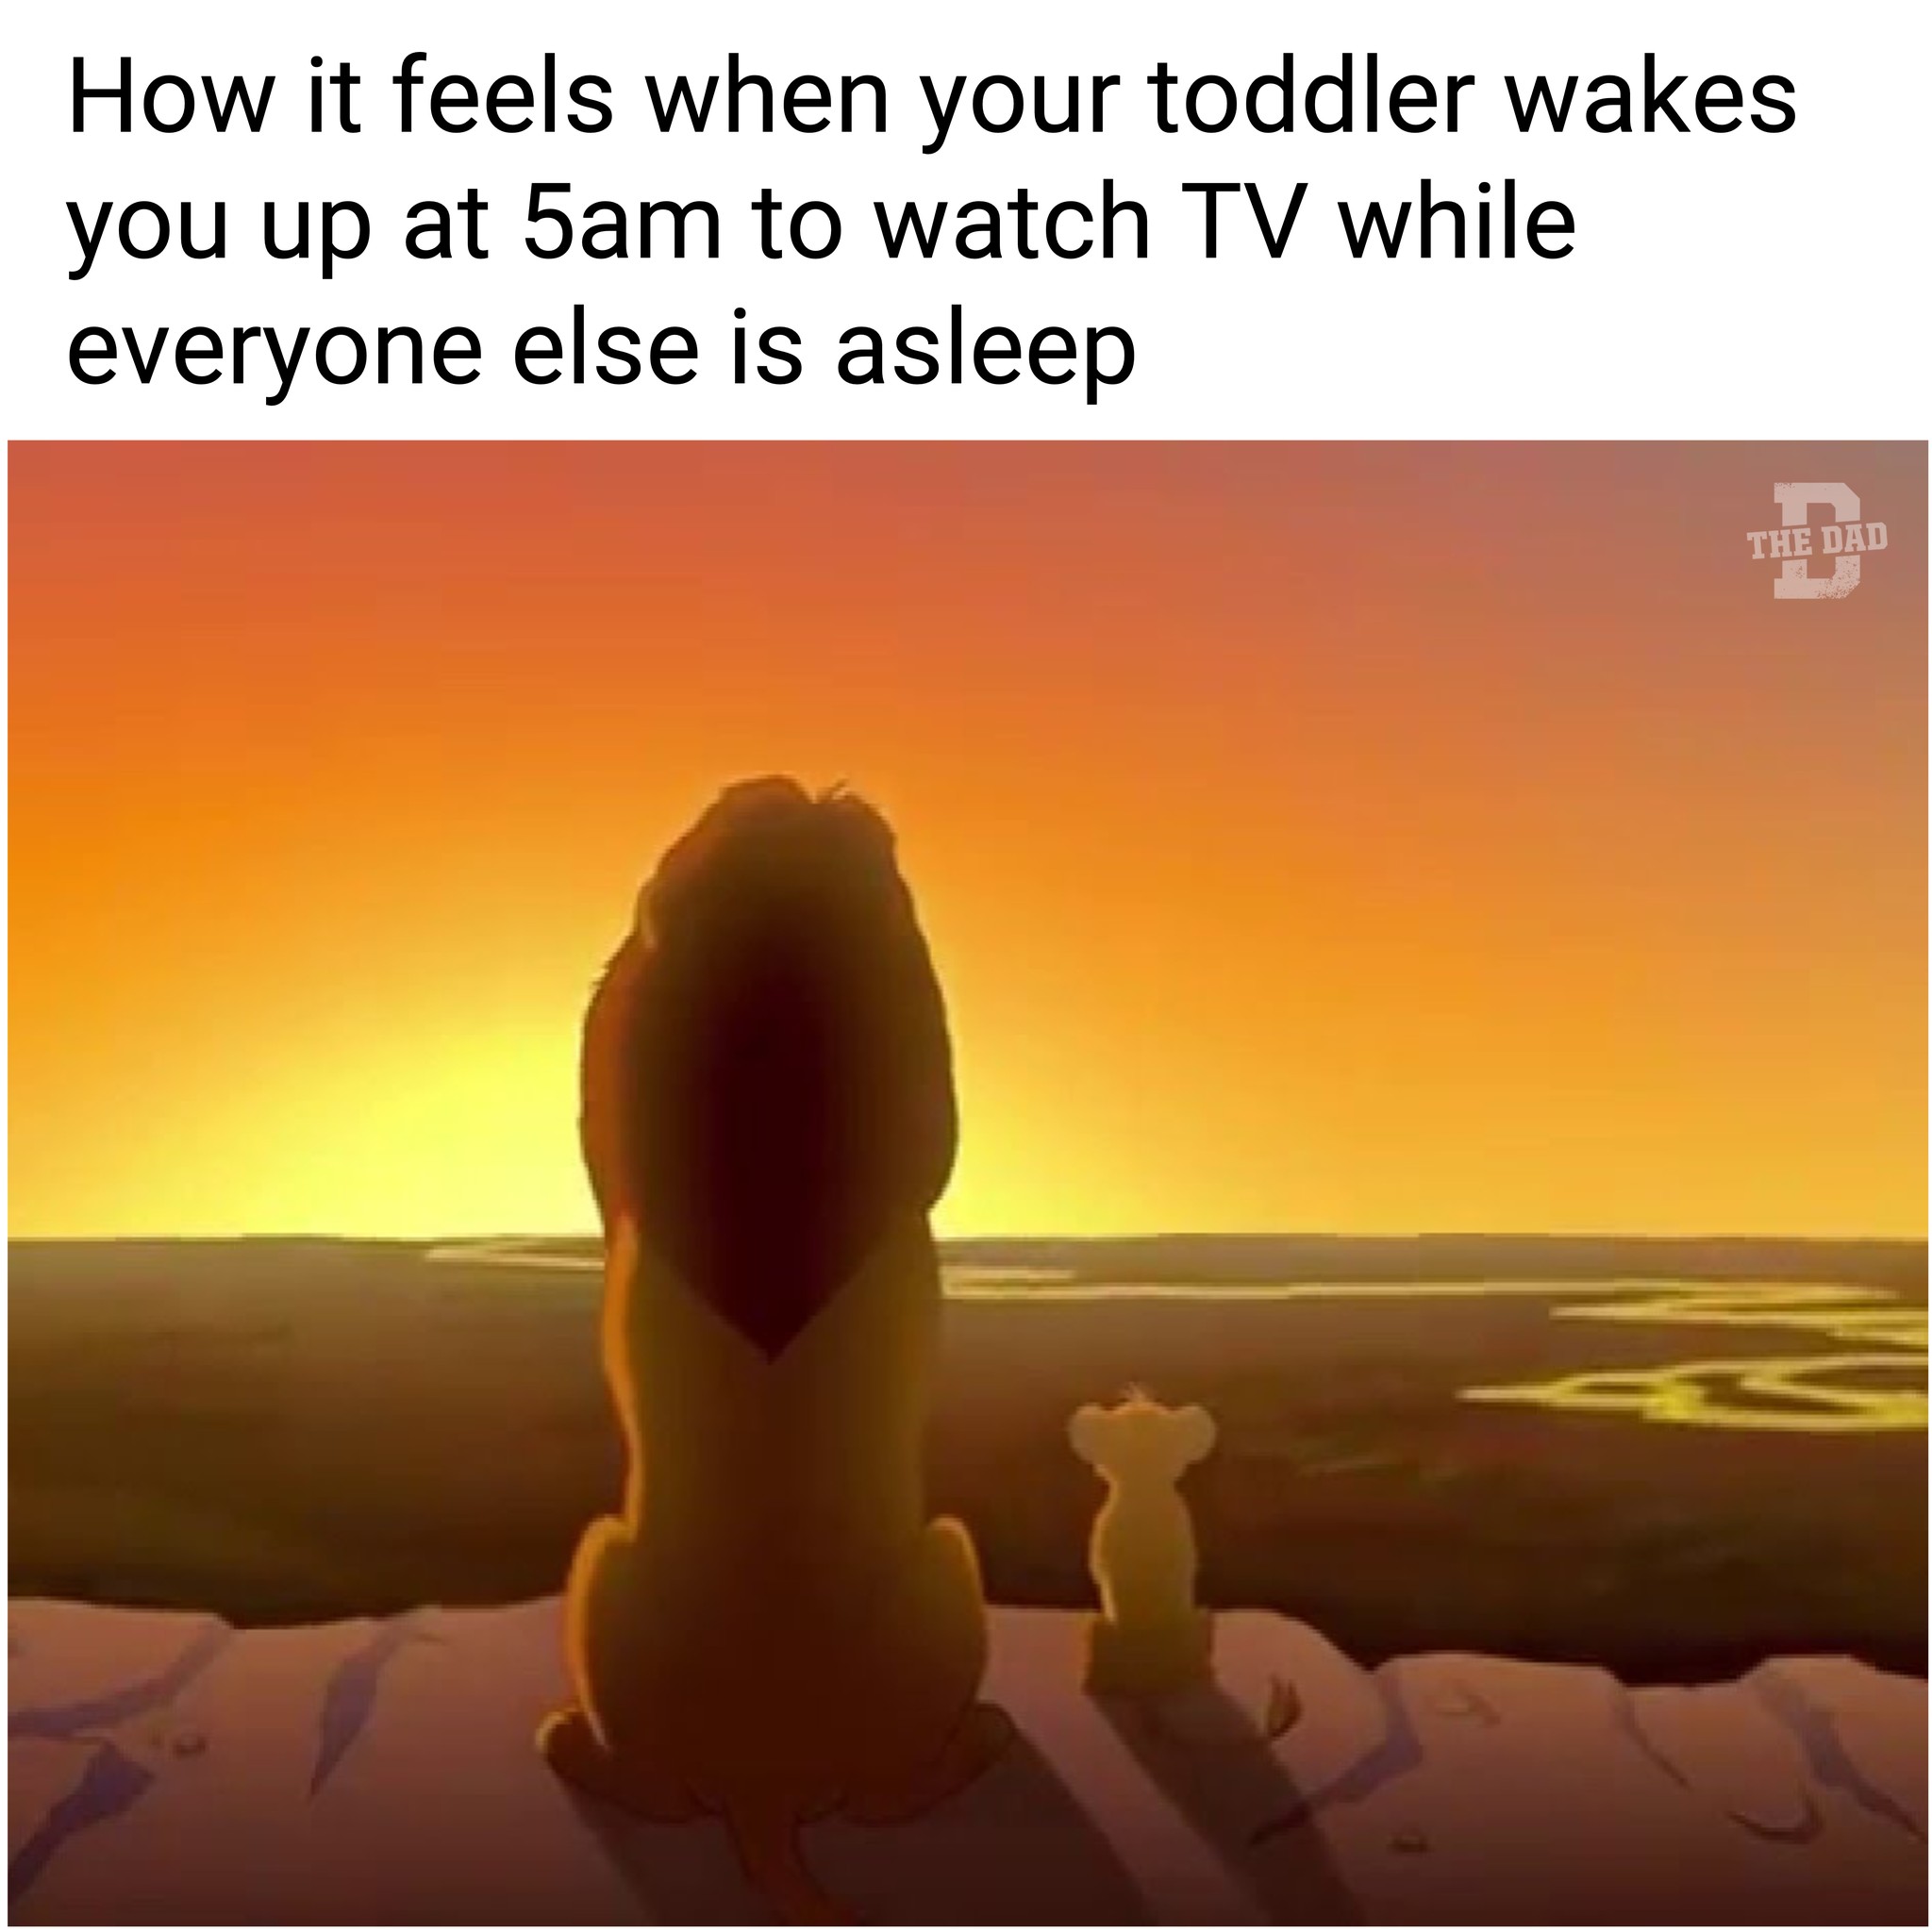 how it feels when your toddler wakes you up at 5am to watch tv while everyone else is asleep